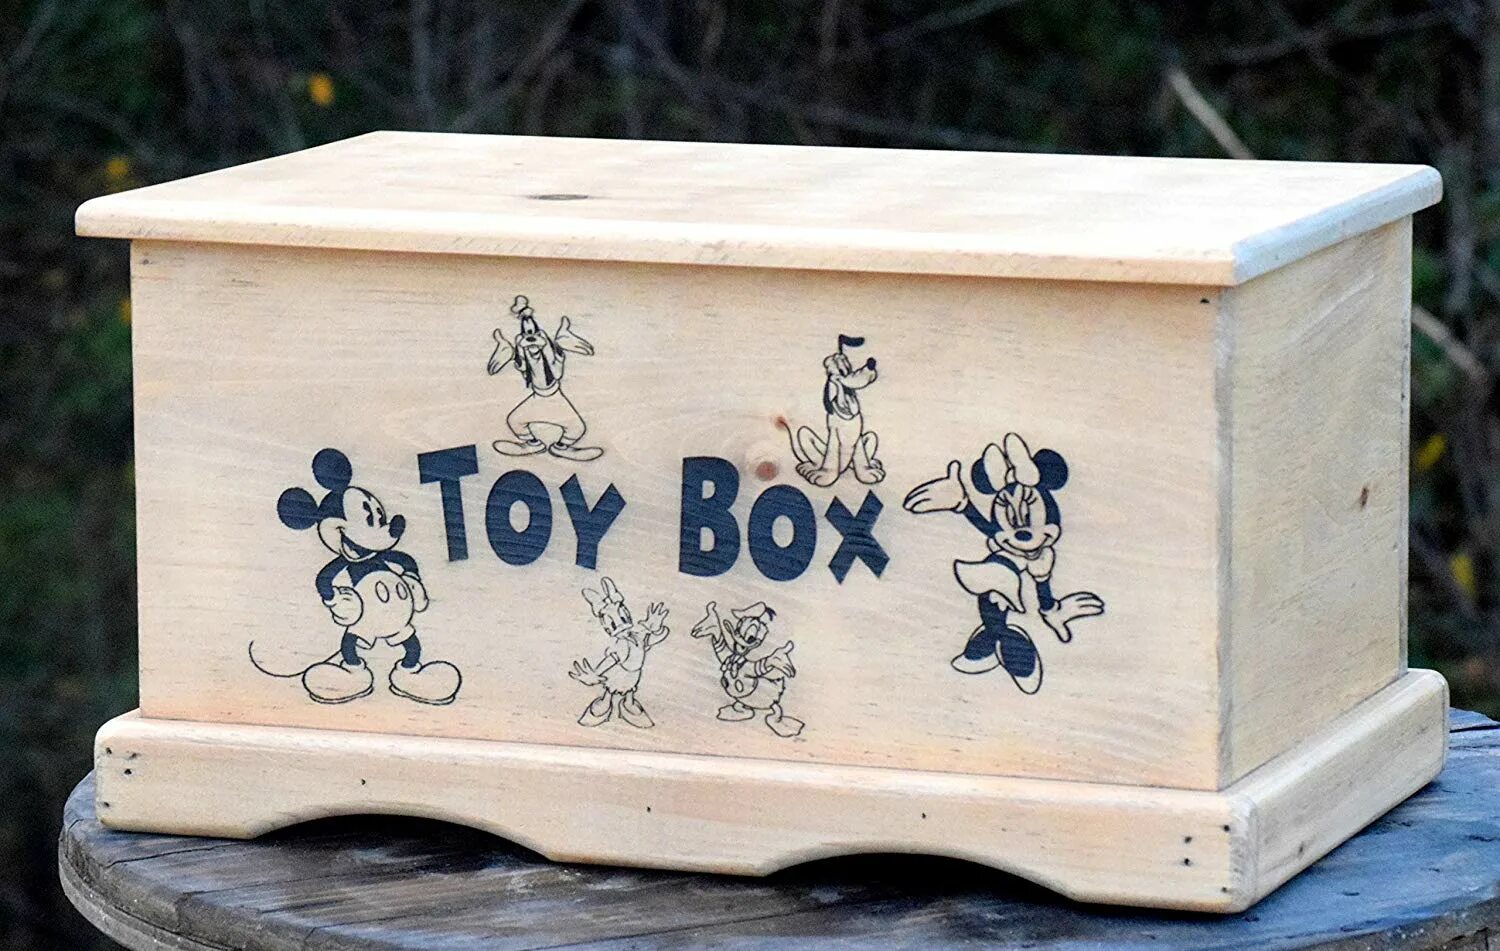 Has larry got a toy box. Toy Box. Memory Box деревянный. Decorated Chest for children. Выход из the Toy Box.